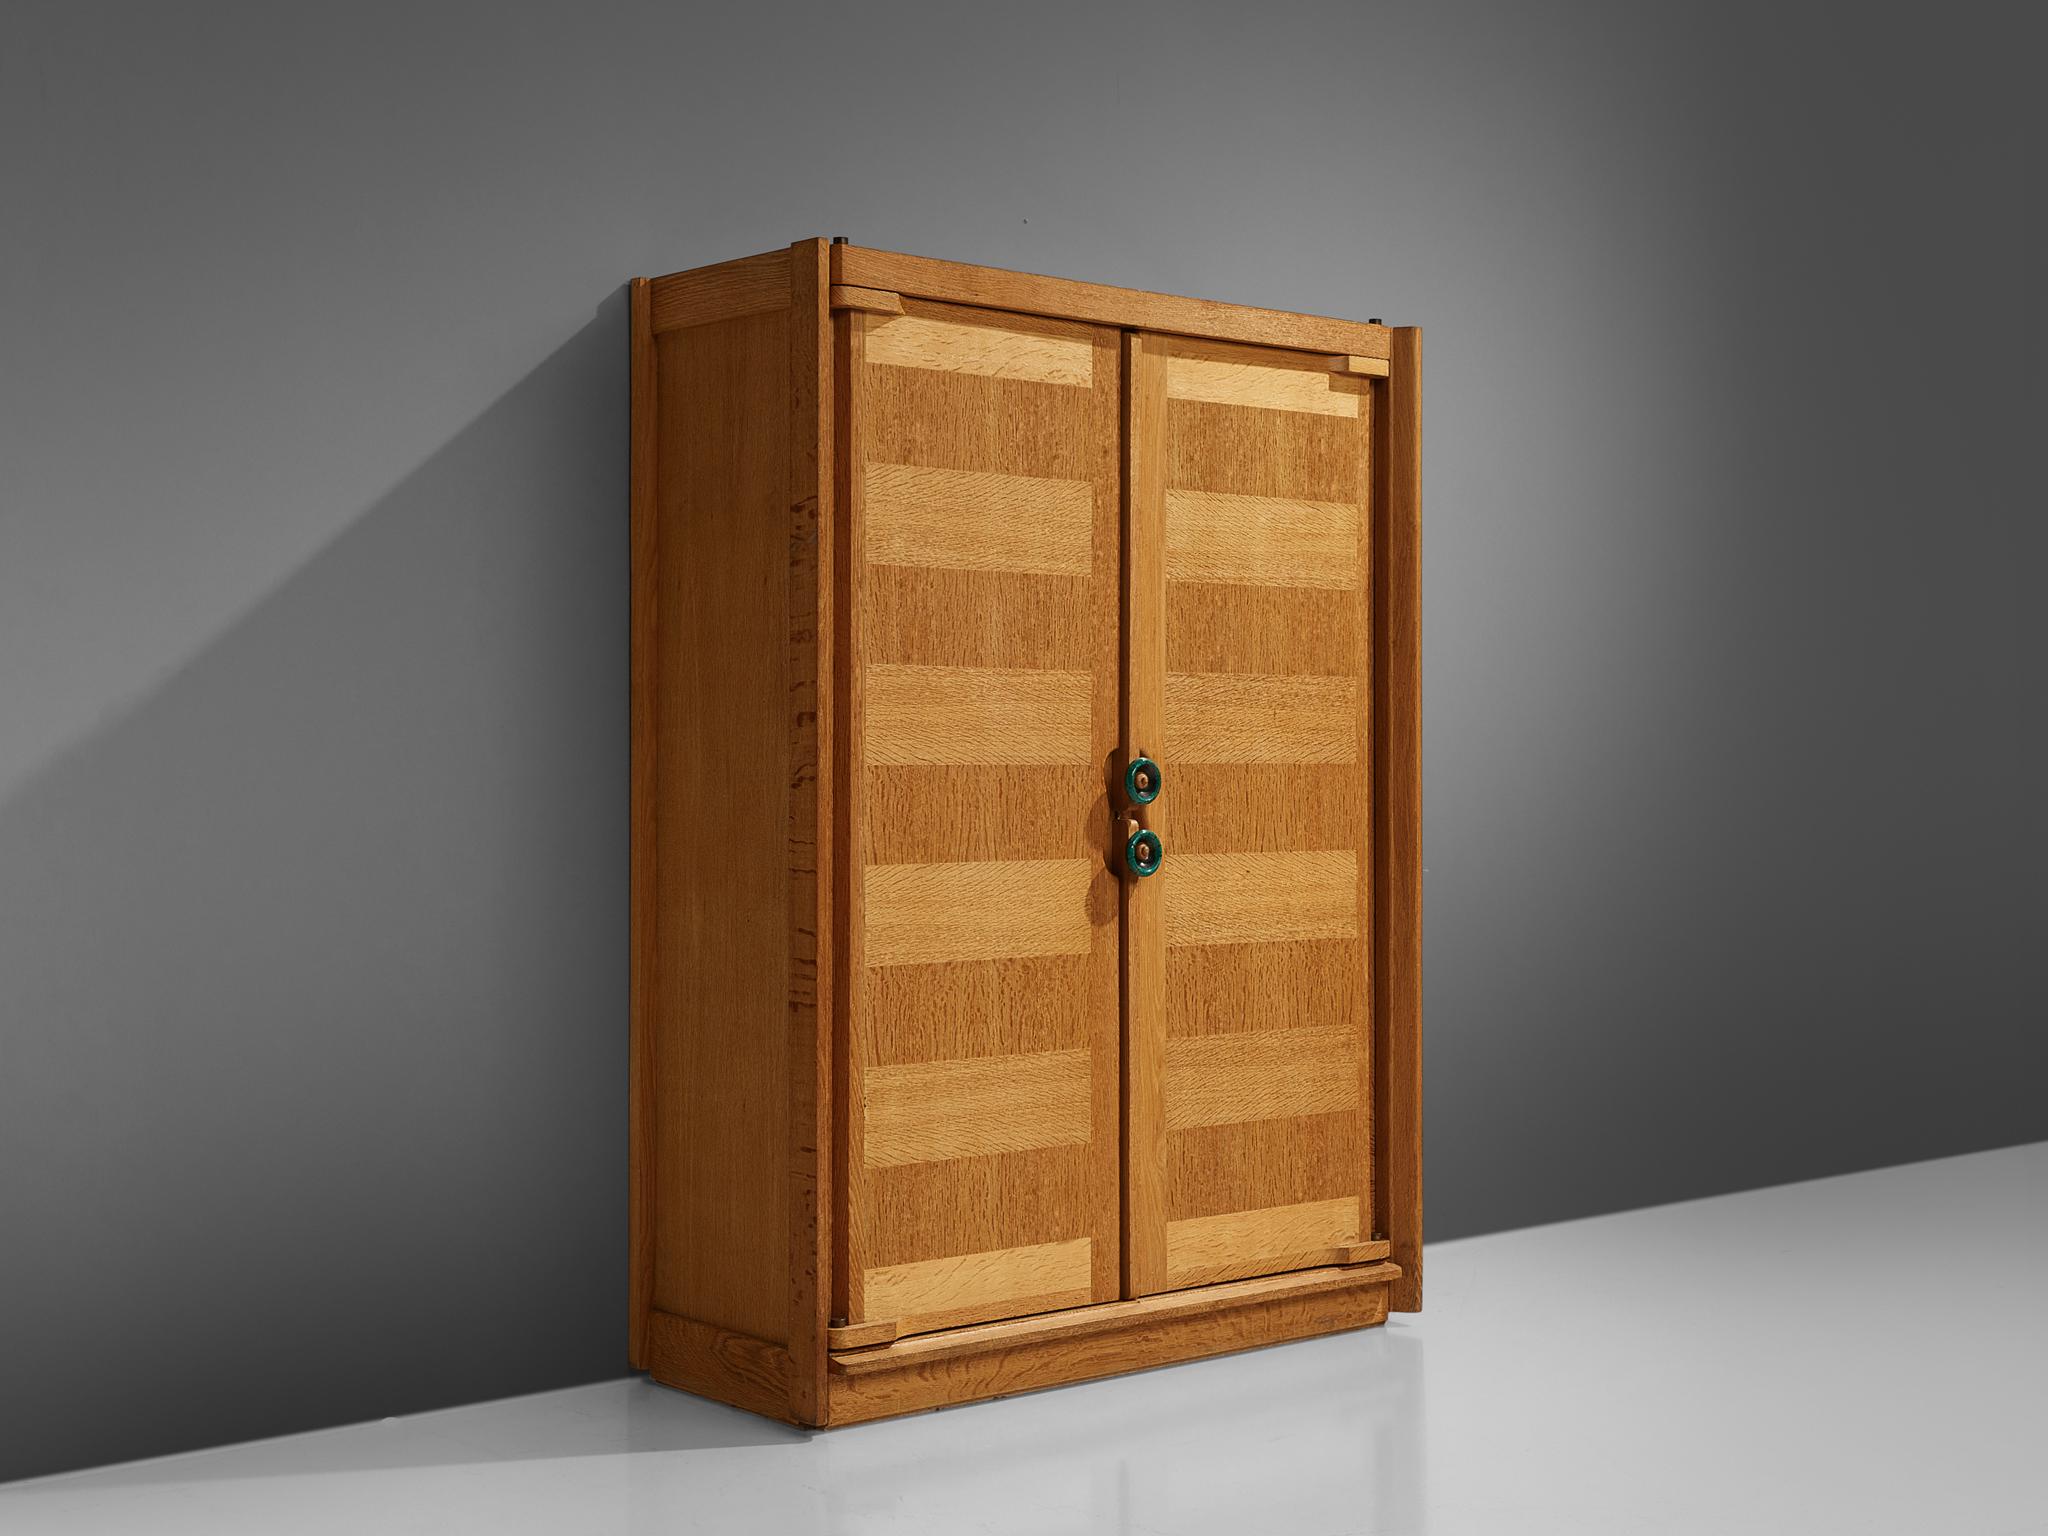 Guillerme et Chambron, armoire, oak, France, 1960s.

This case piece is designed by Guillerme and Chambron and features geometric oak inlays, which is characteristic for the French duo. The armoire is equipped with colorful, ceramic handles. The